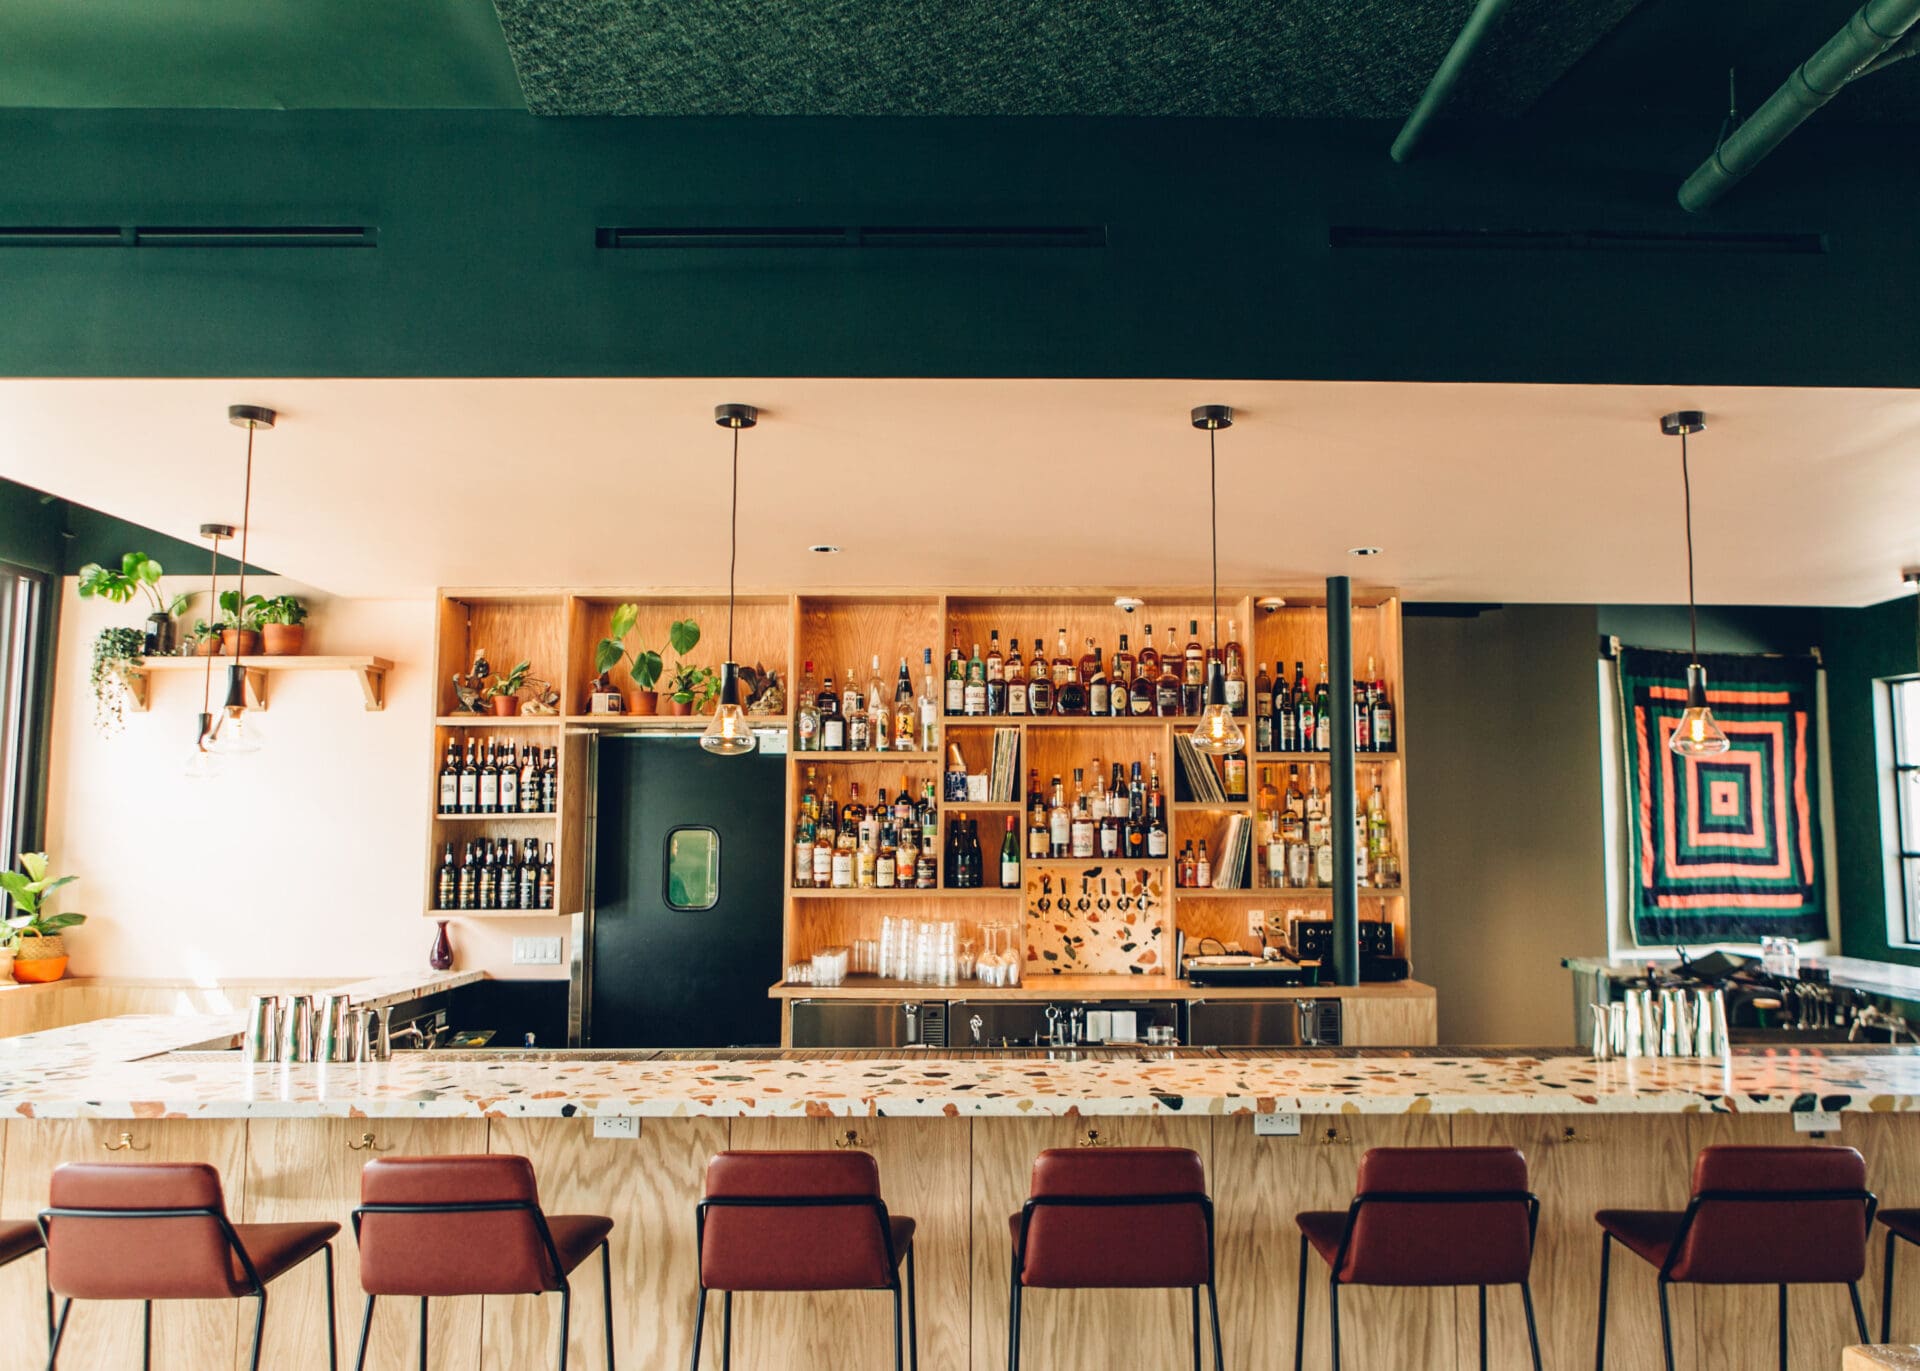 Los Angeles best cocktail bars | A view of the bar at Thunderbolt, where high red chairs line a terrazzo bar top, and drinks line the shelves. A green ceiling can be seen